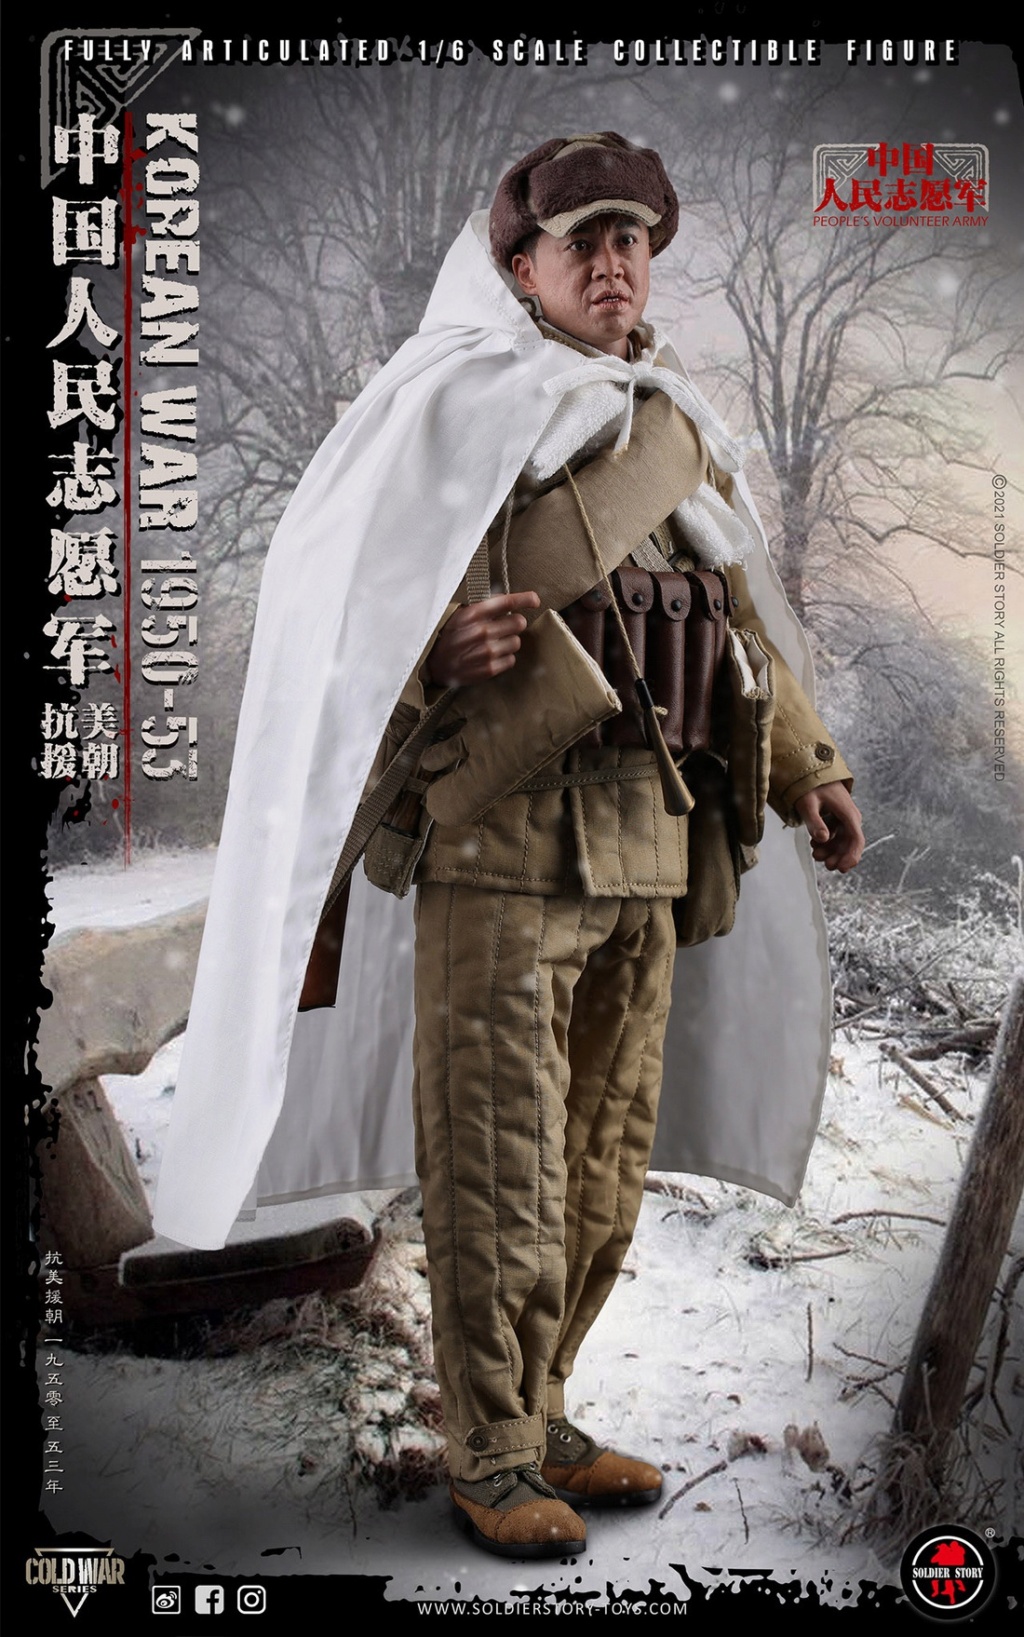 NEW PRODUCT: SOLDIER STORY: 1/6 Chinese People’s Volunteers 1950-53 Collectible Action Figure (#SS-124) 6bc07c10